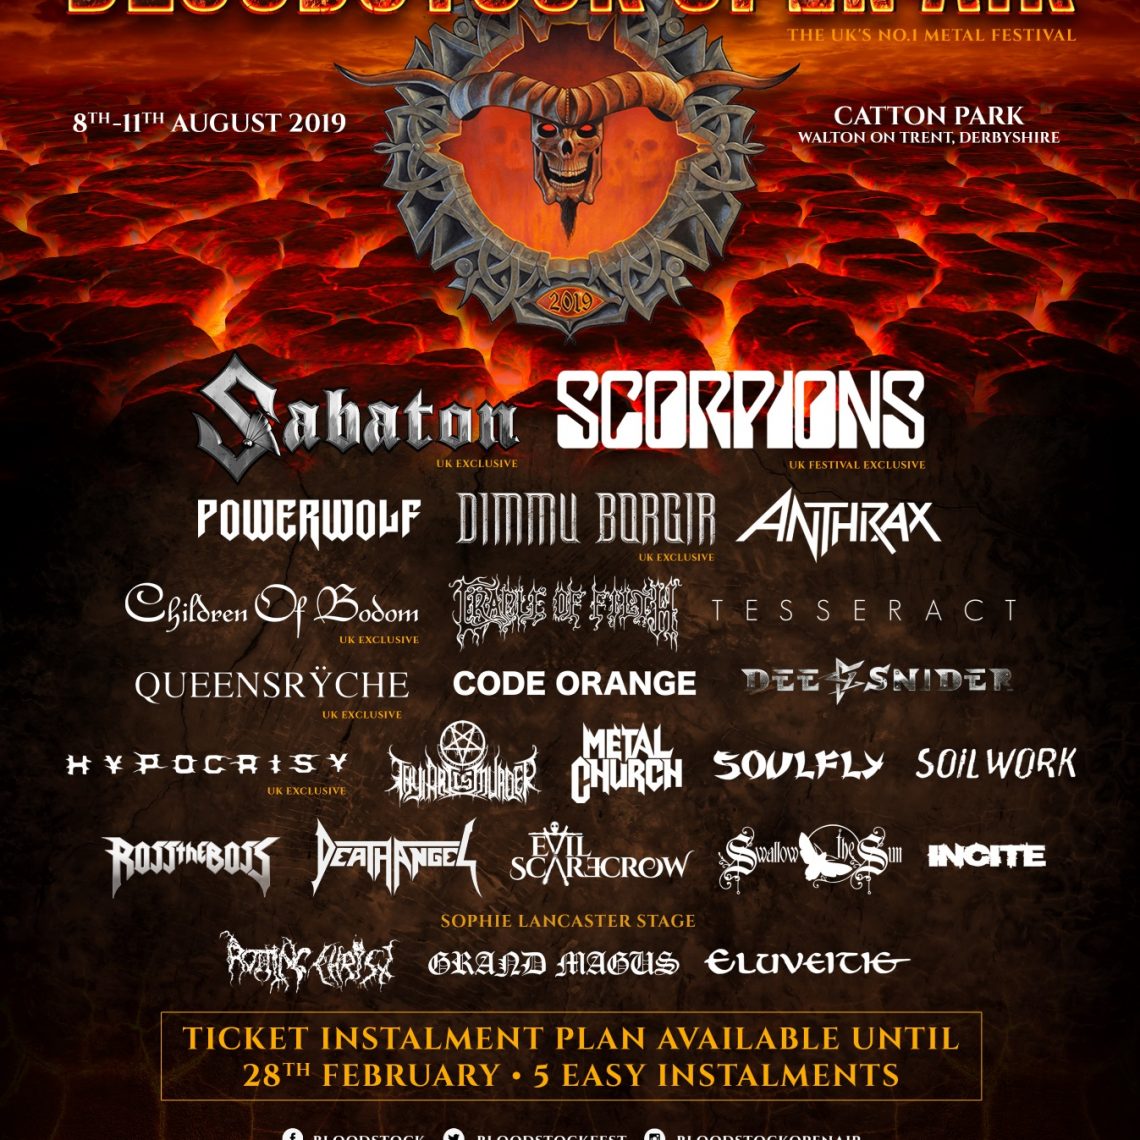 BLOODSTOCK announces 4 more bands to kick off 2019